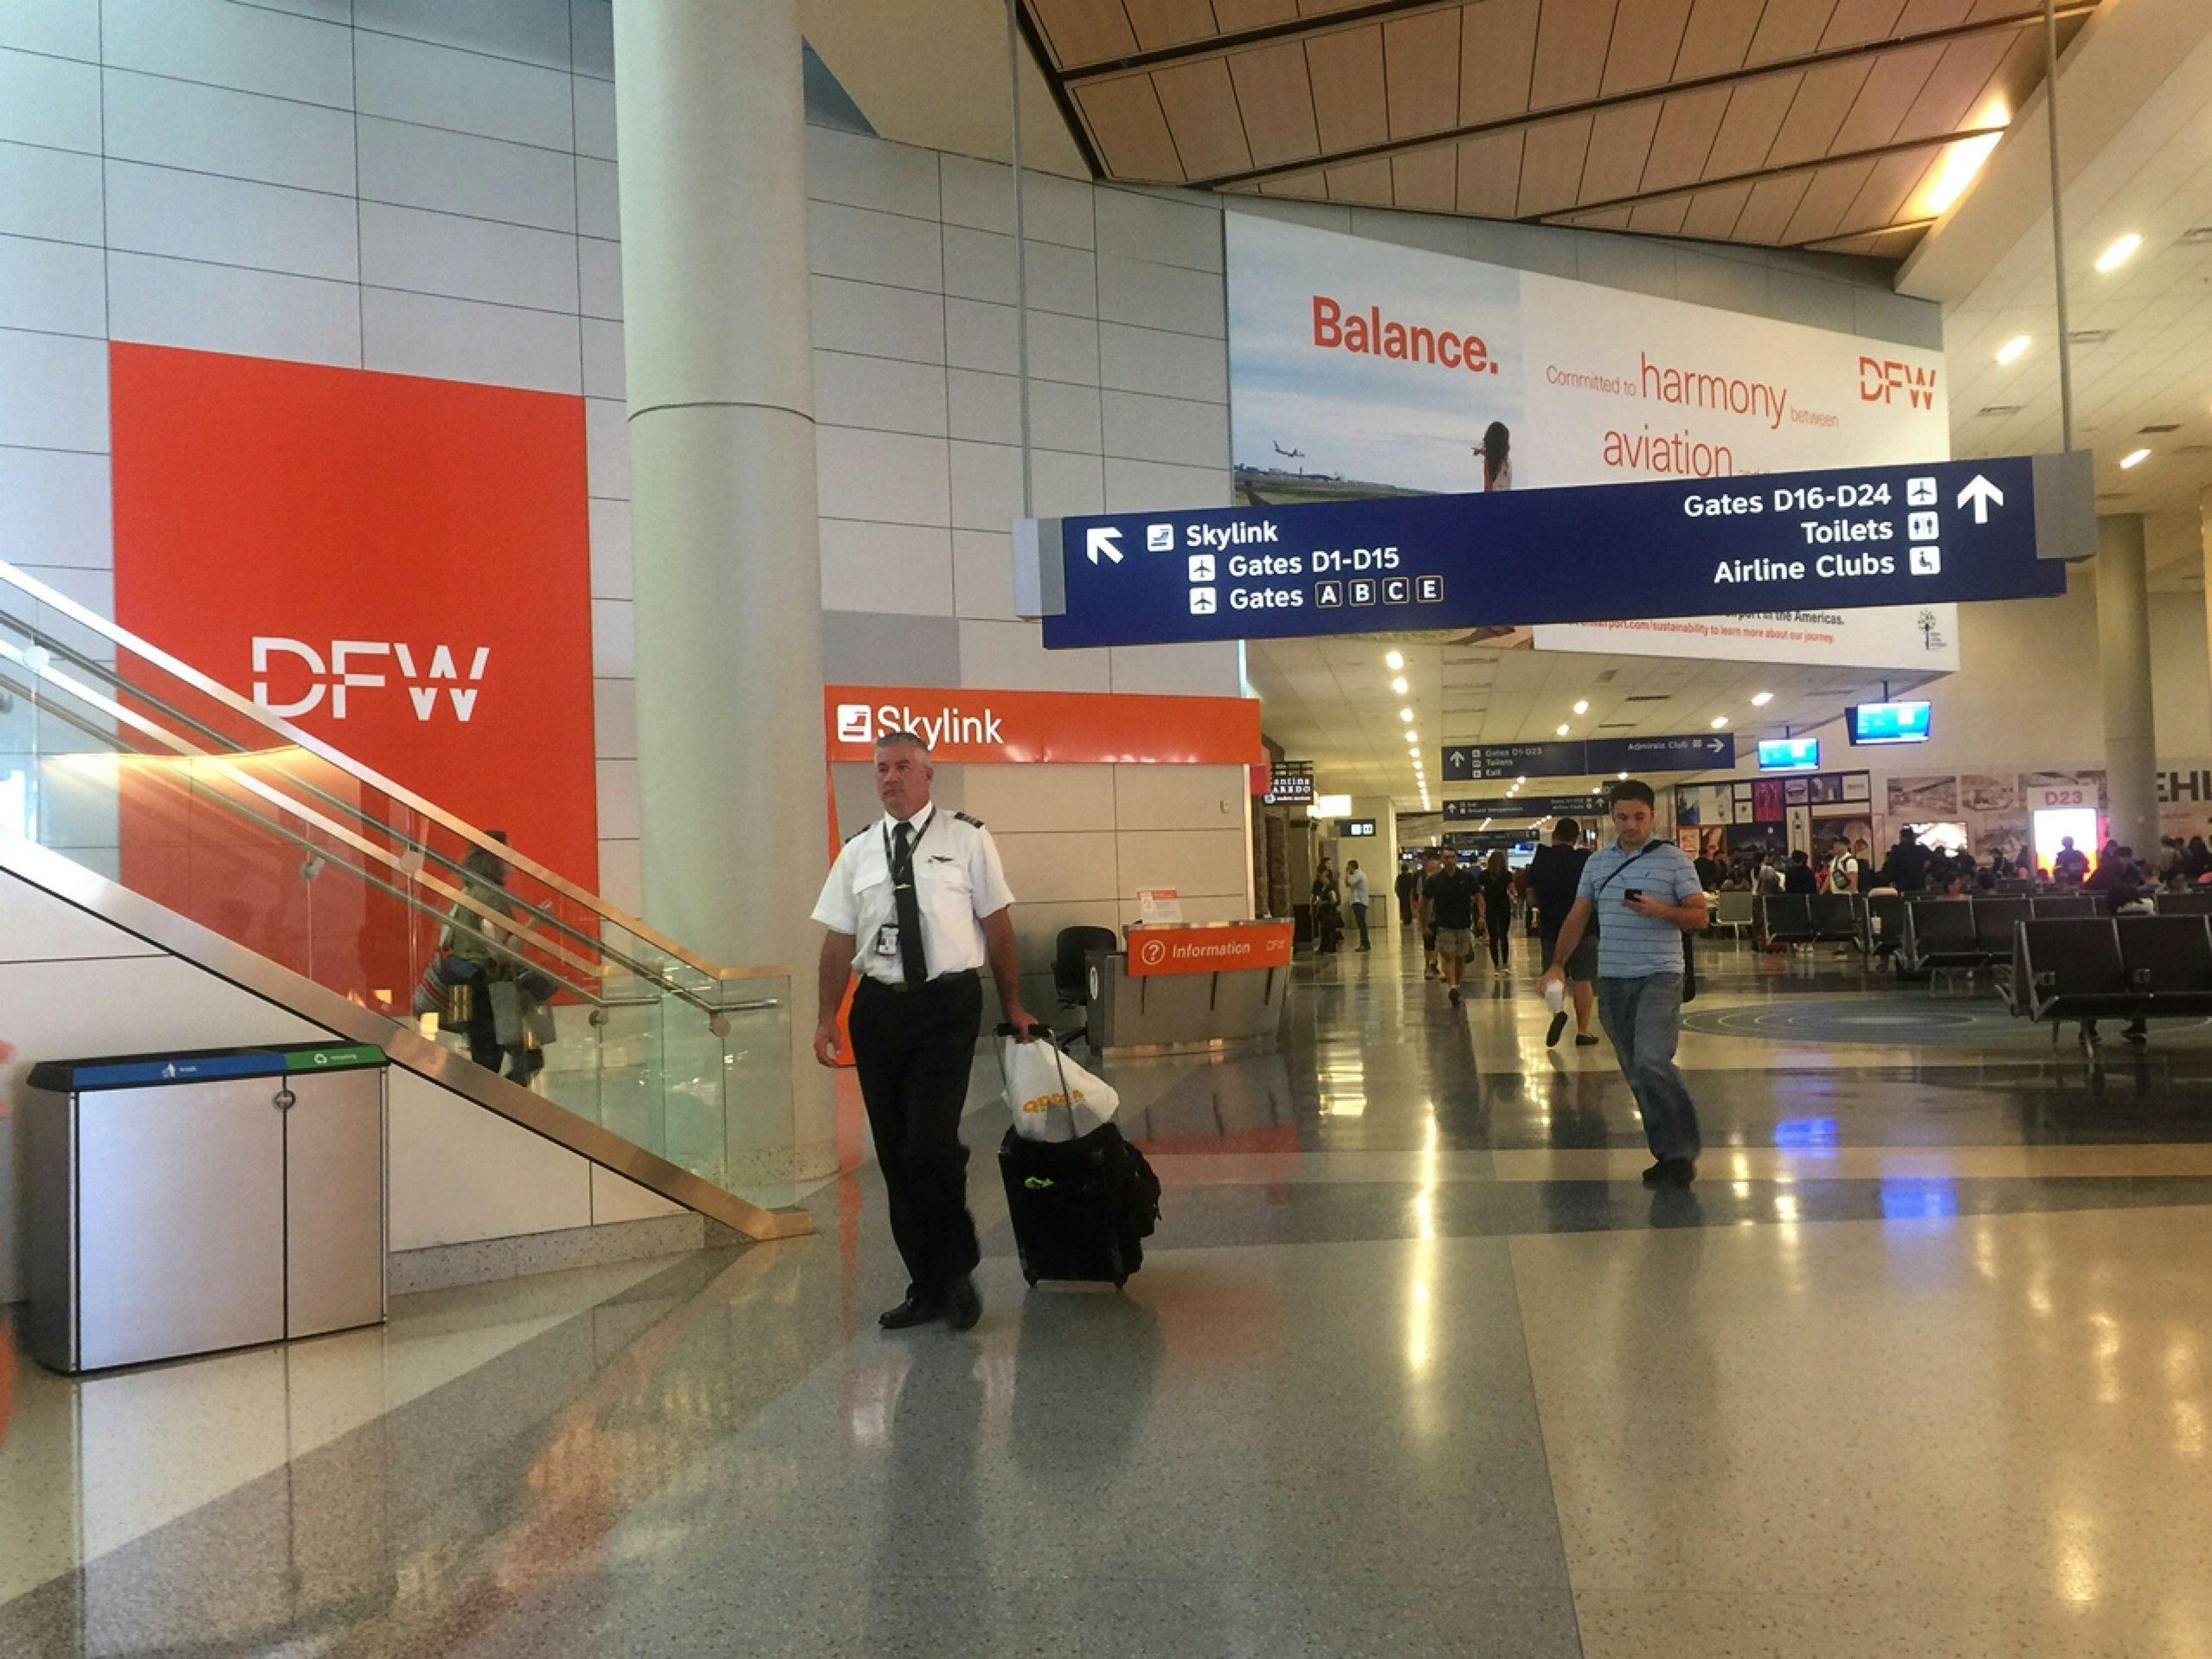 An airplane captain wearing a uniform and carrying a suitcase walks in the terminal of Dallas Fort Worth International Airport